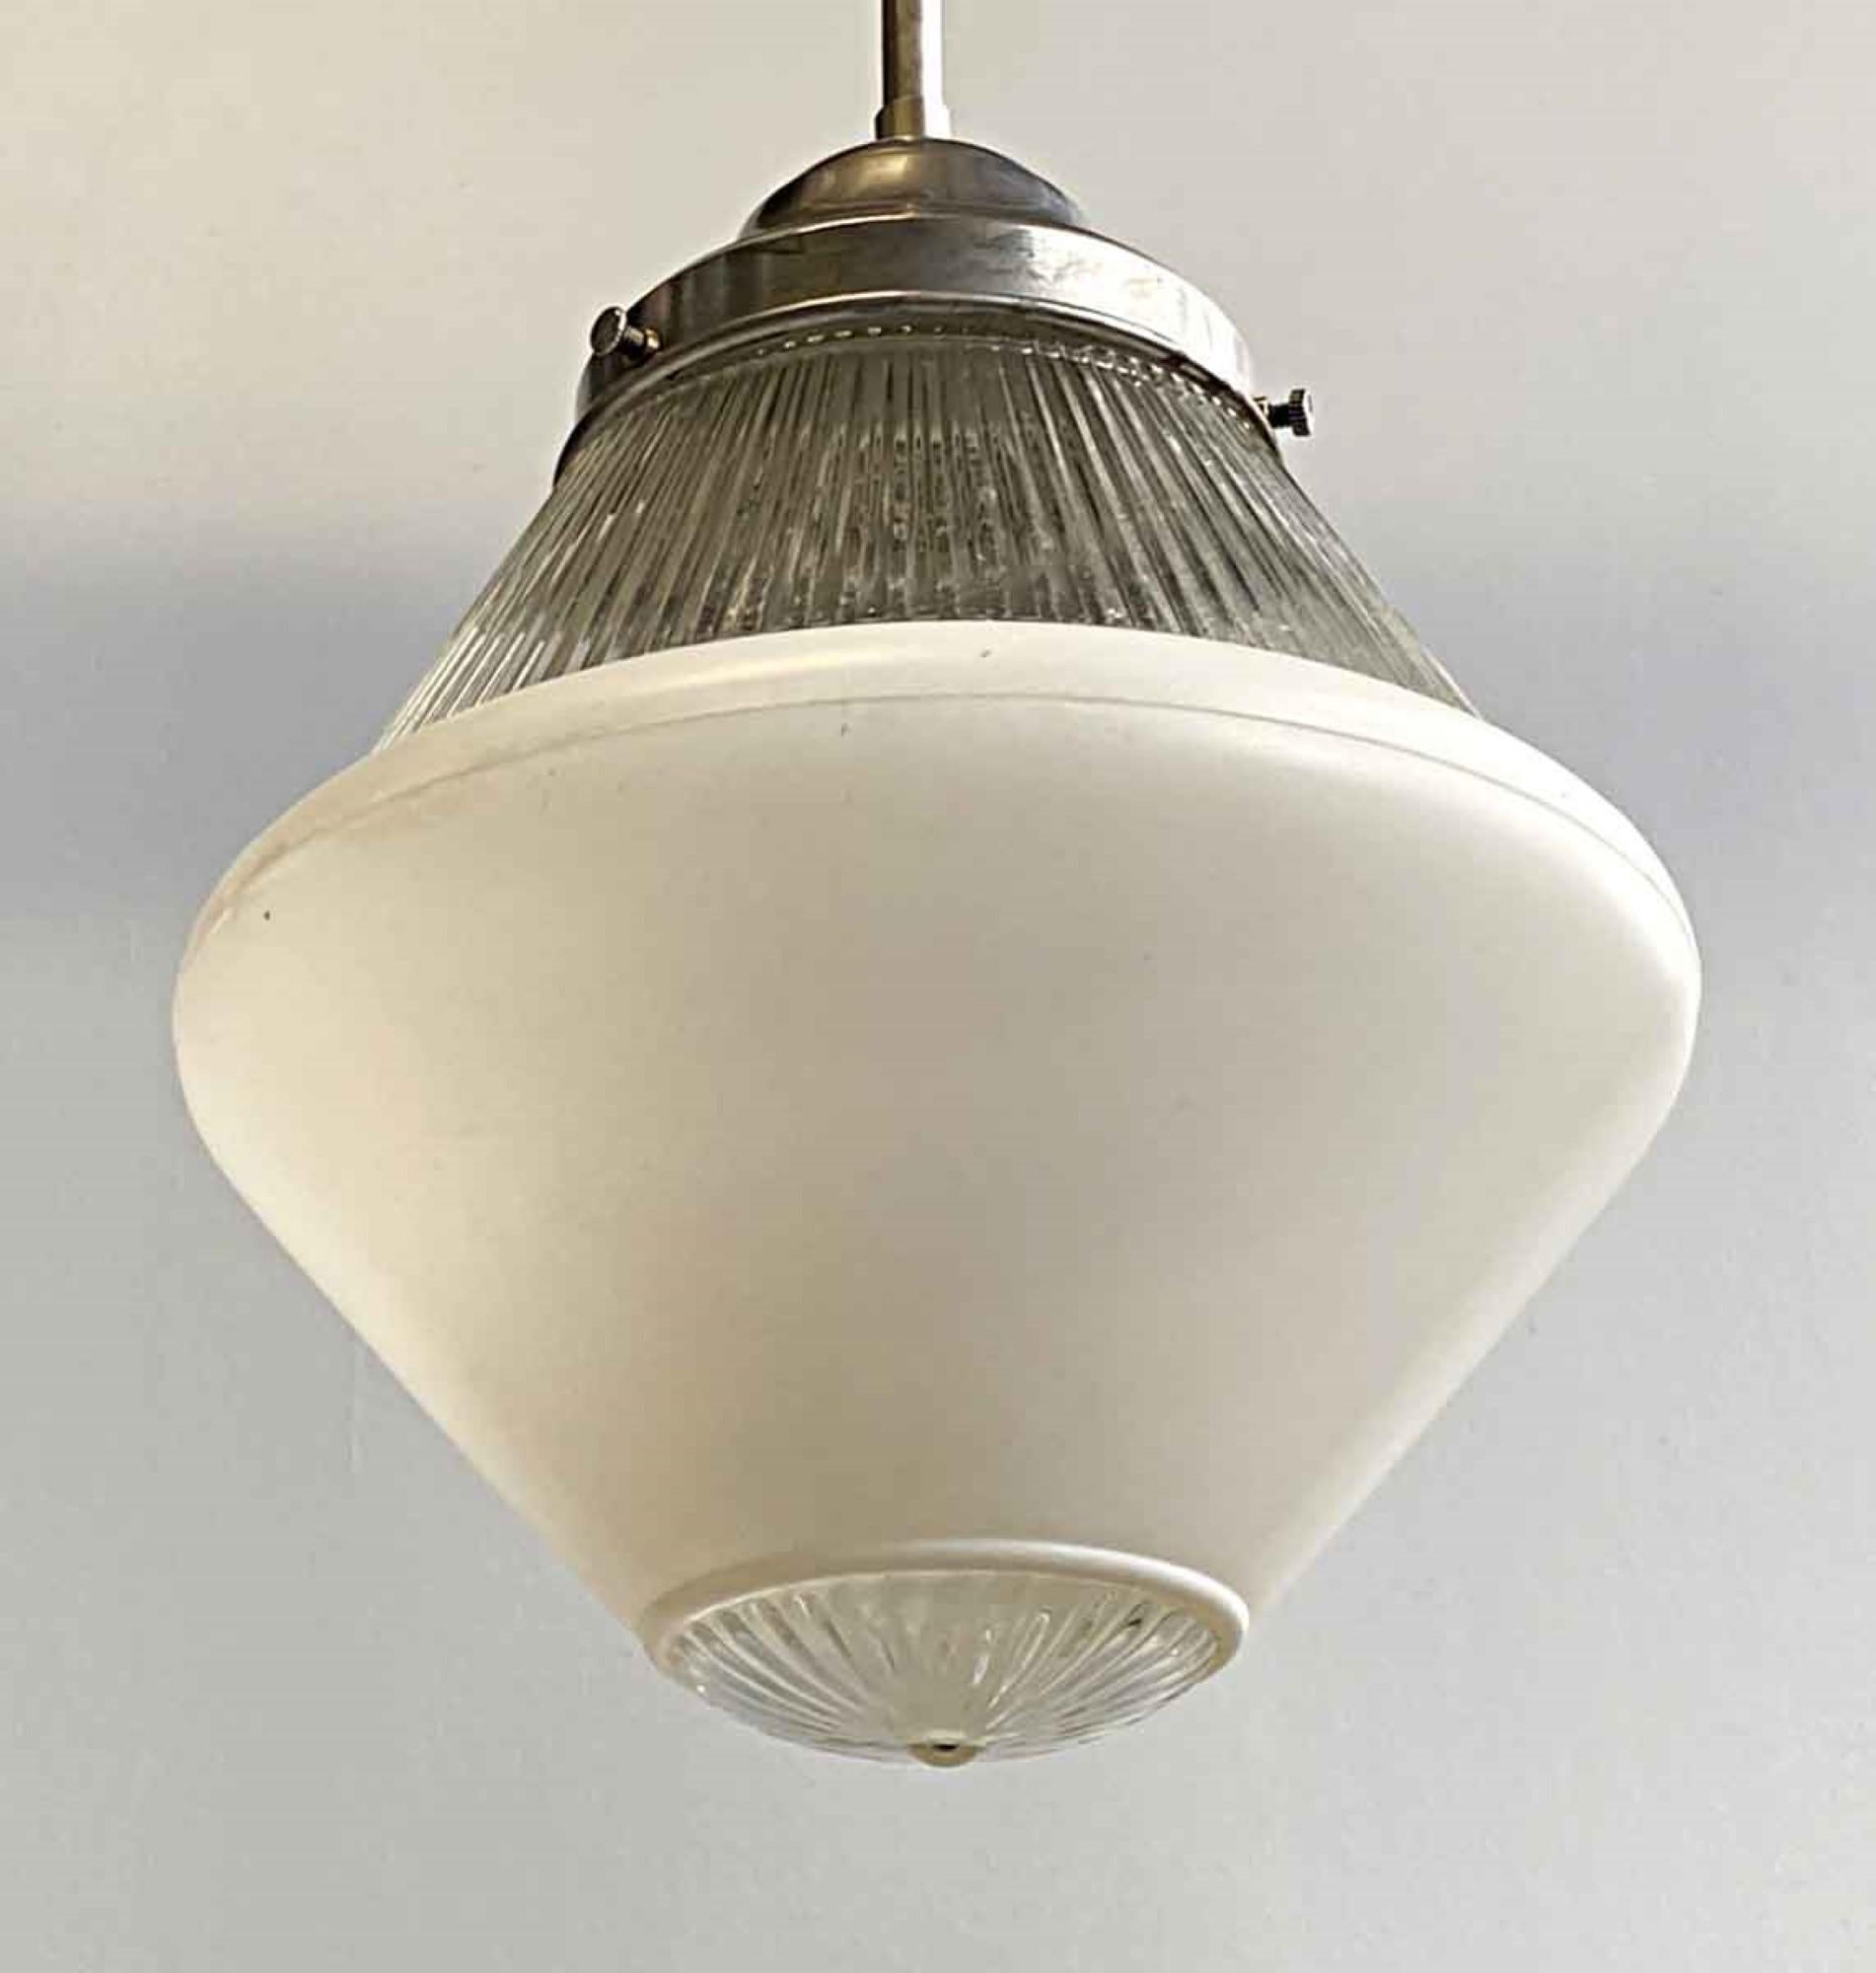 Diamond shaped 1950s white cast glass pendant light. This light is ideal for a bathroom. Price includes restoration.